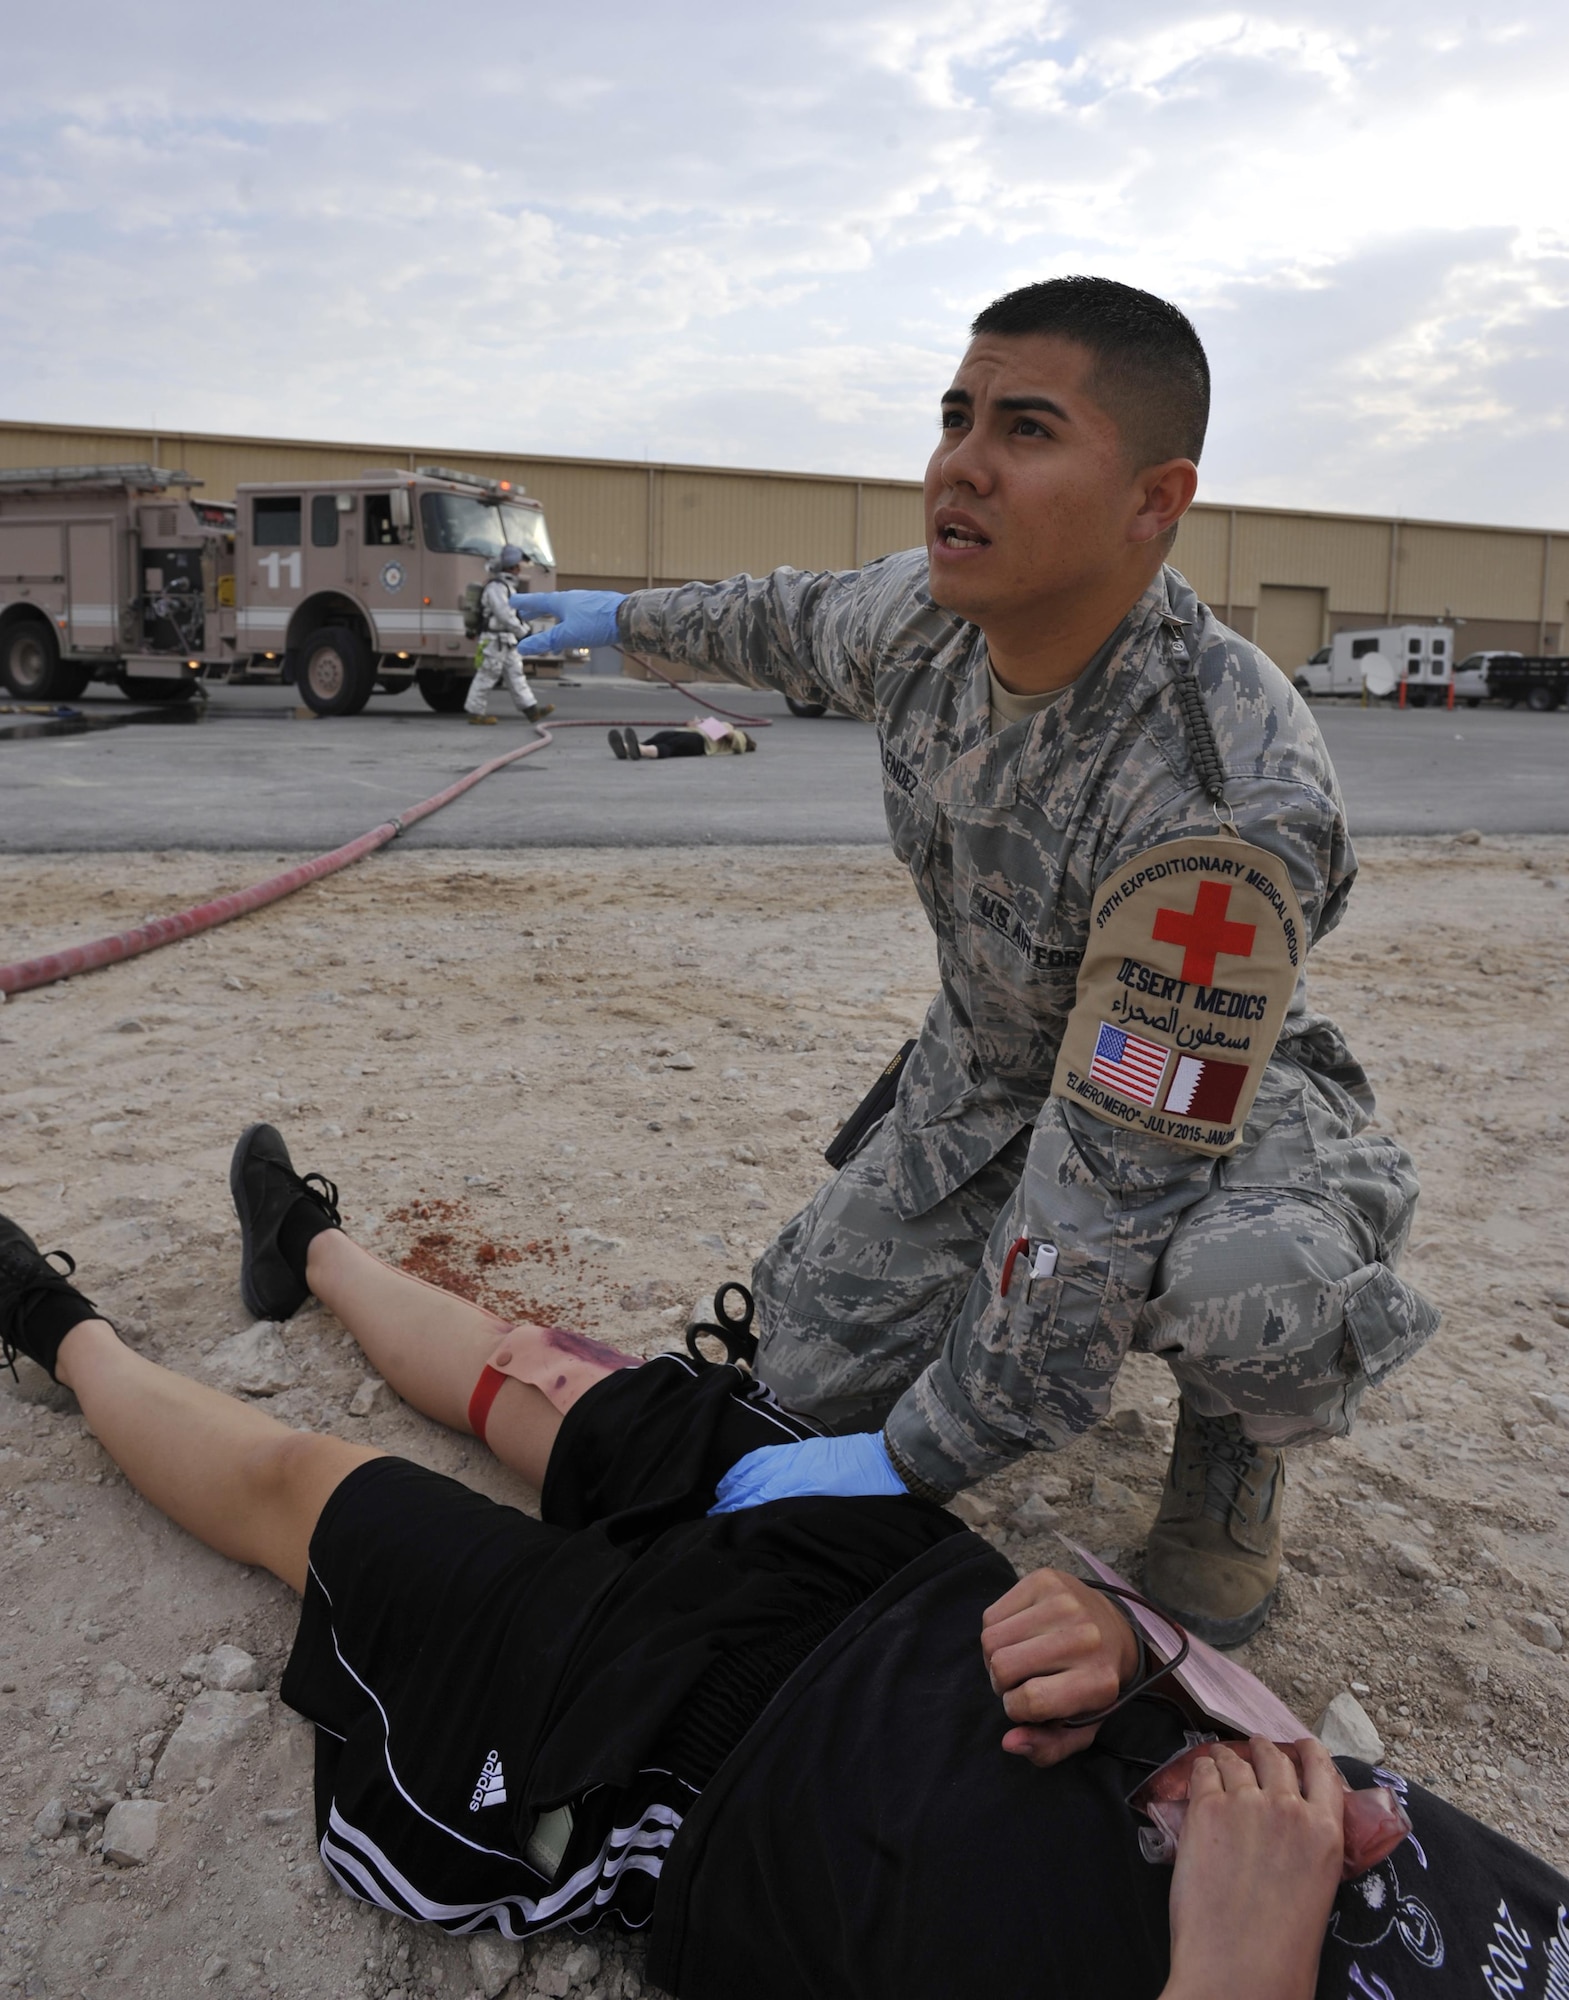 Senior Airman Marco Melendez, 379th Expeditionary Medical Operations Squadron, Al Udeid Air Base, Qatar, yells commands to another responder during a mass casualty exercise at AUAB, Dec. 15. The exercise tested the emergency response capabilities of fire and medical personnel. (U.S. Air Force photo by Master Sgt. Joshua Strang)